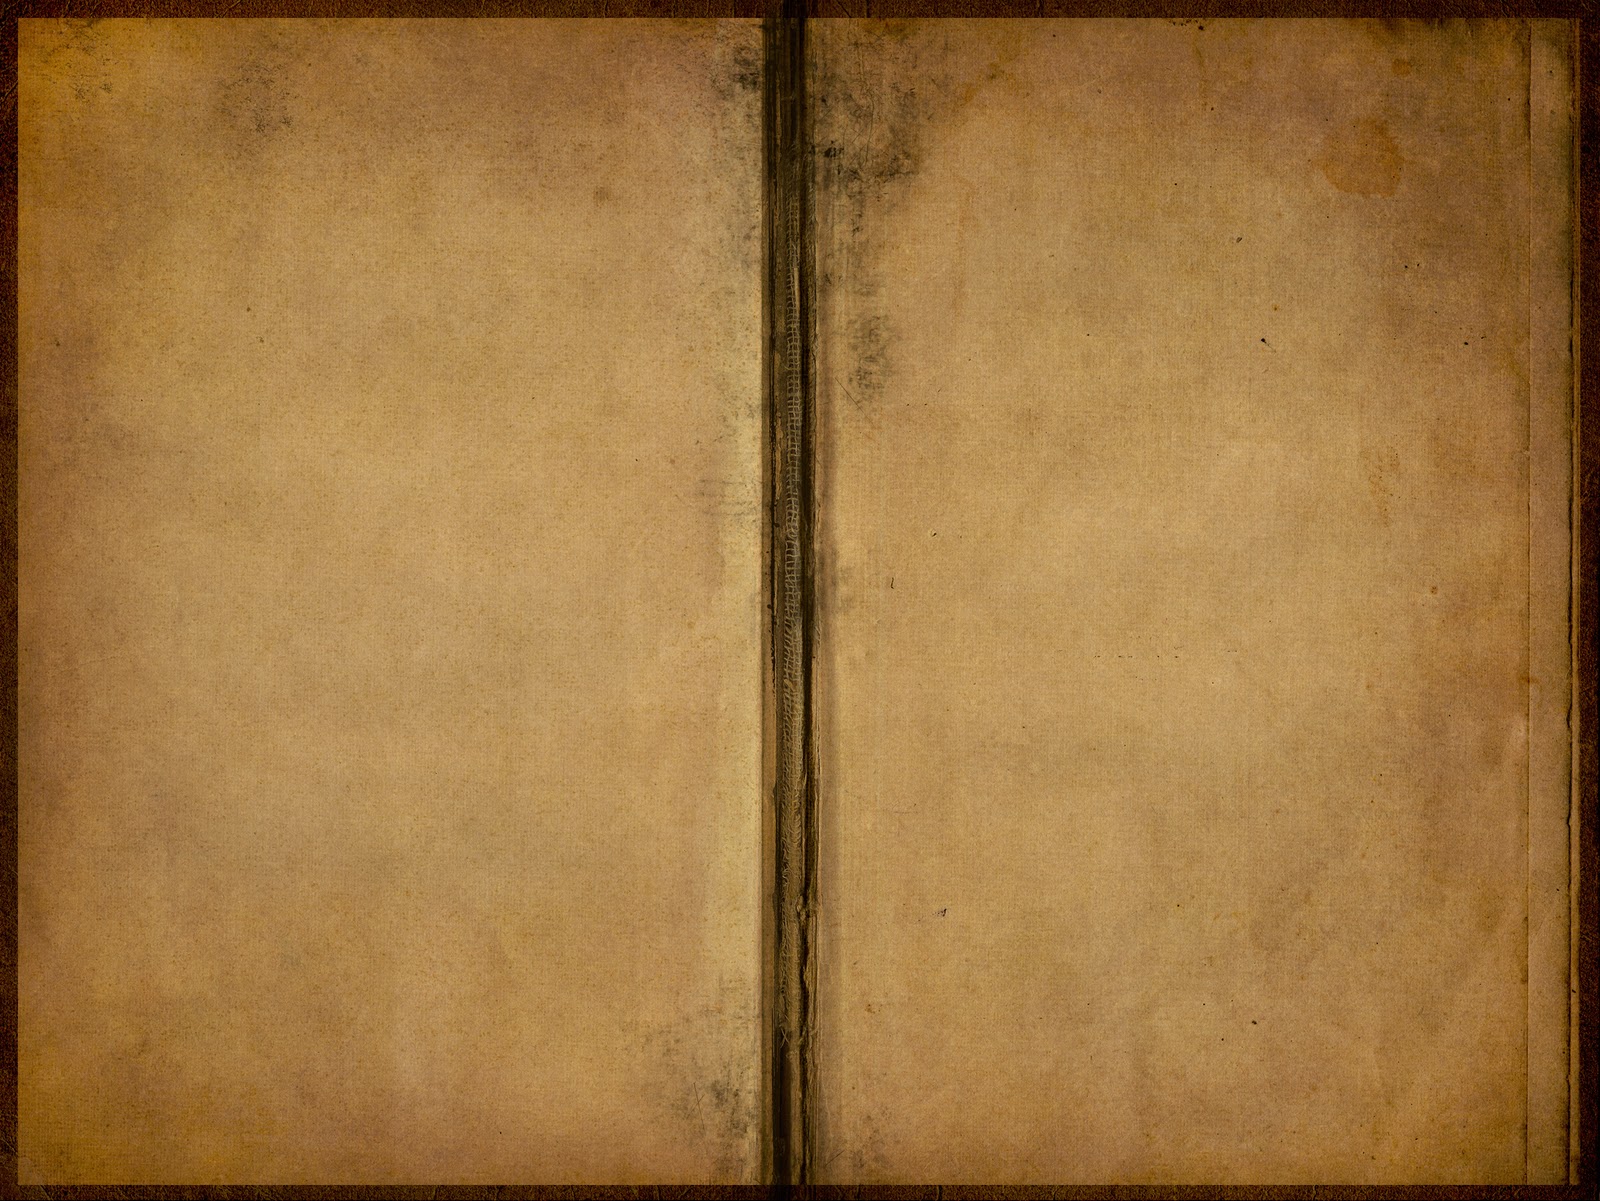 open book, Texture book, download background, open book texture background, books